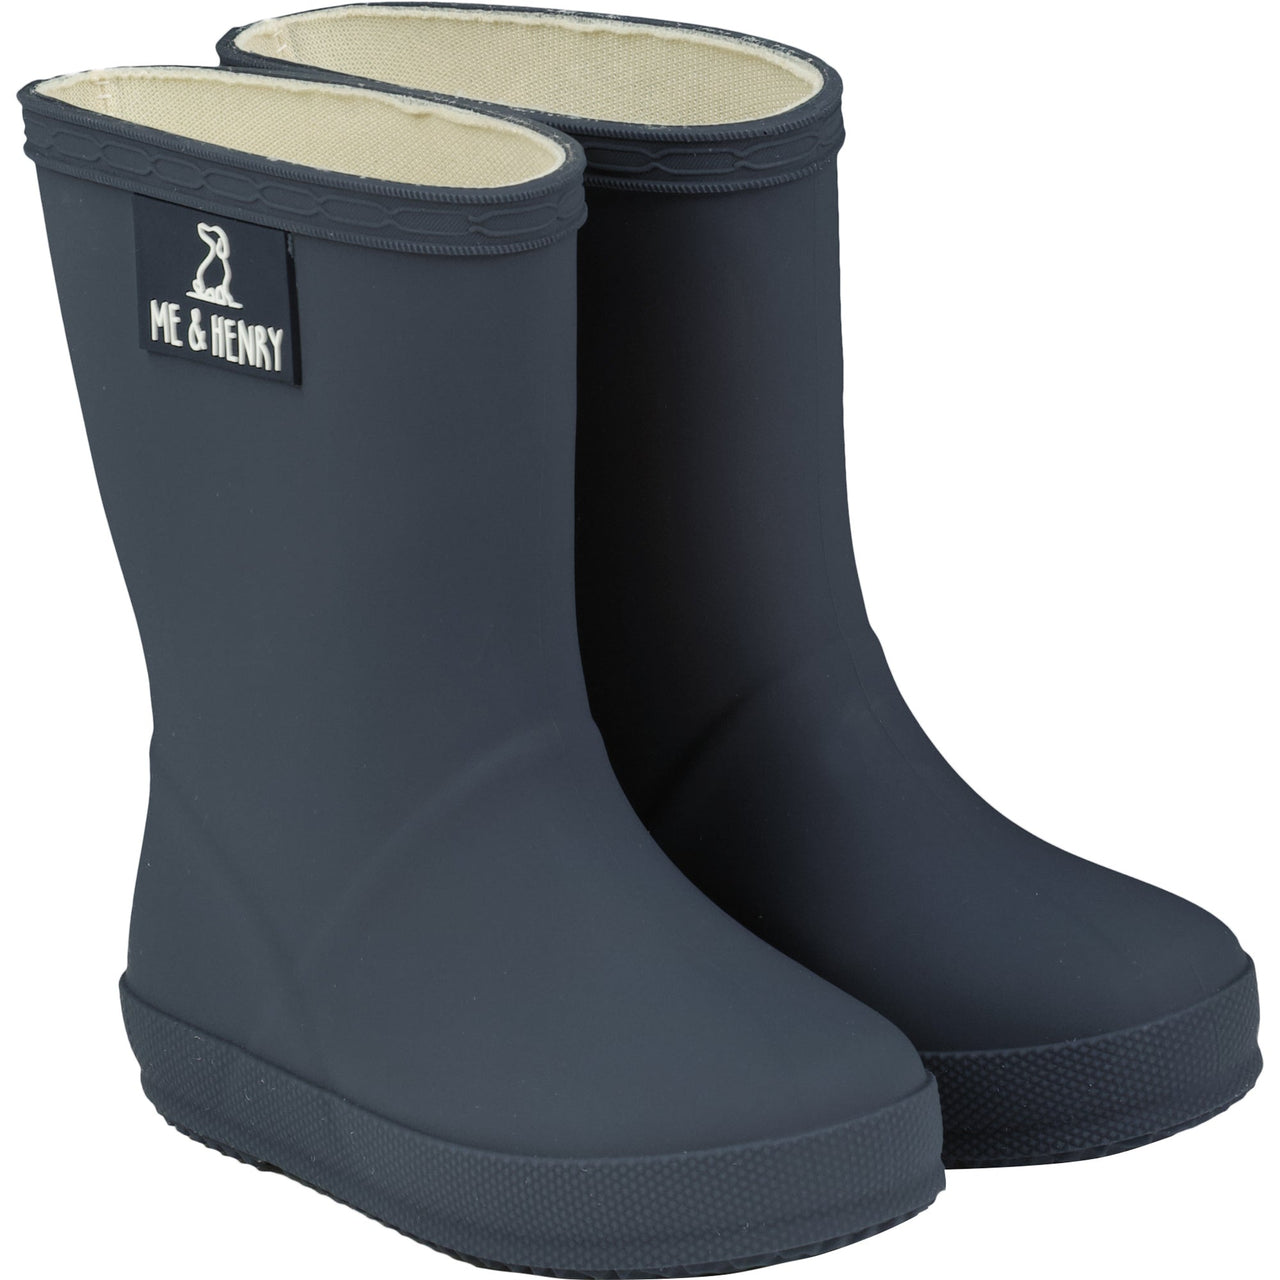 Me & Henry Navy Puddle Rainboots HBS0010 5008